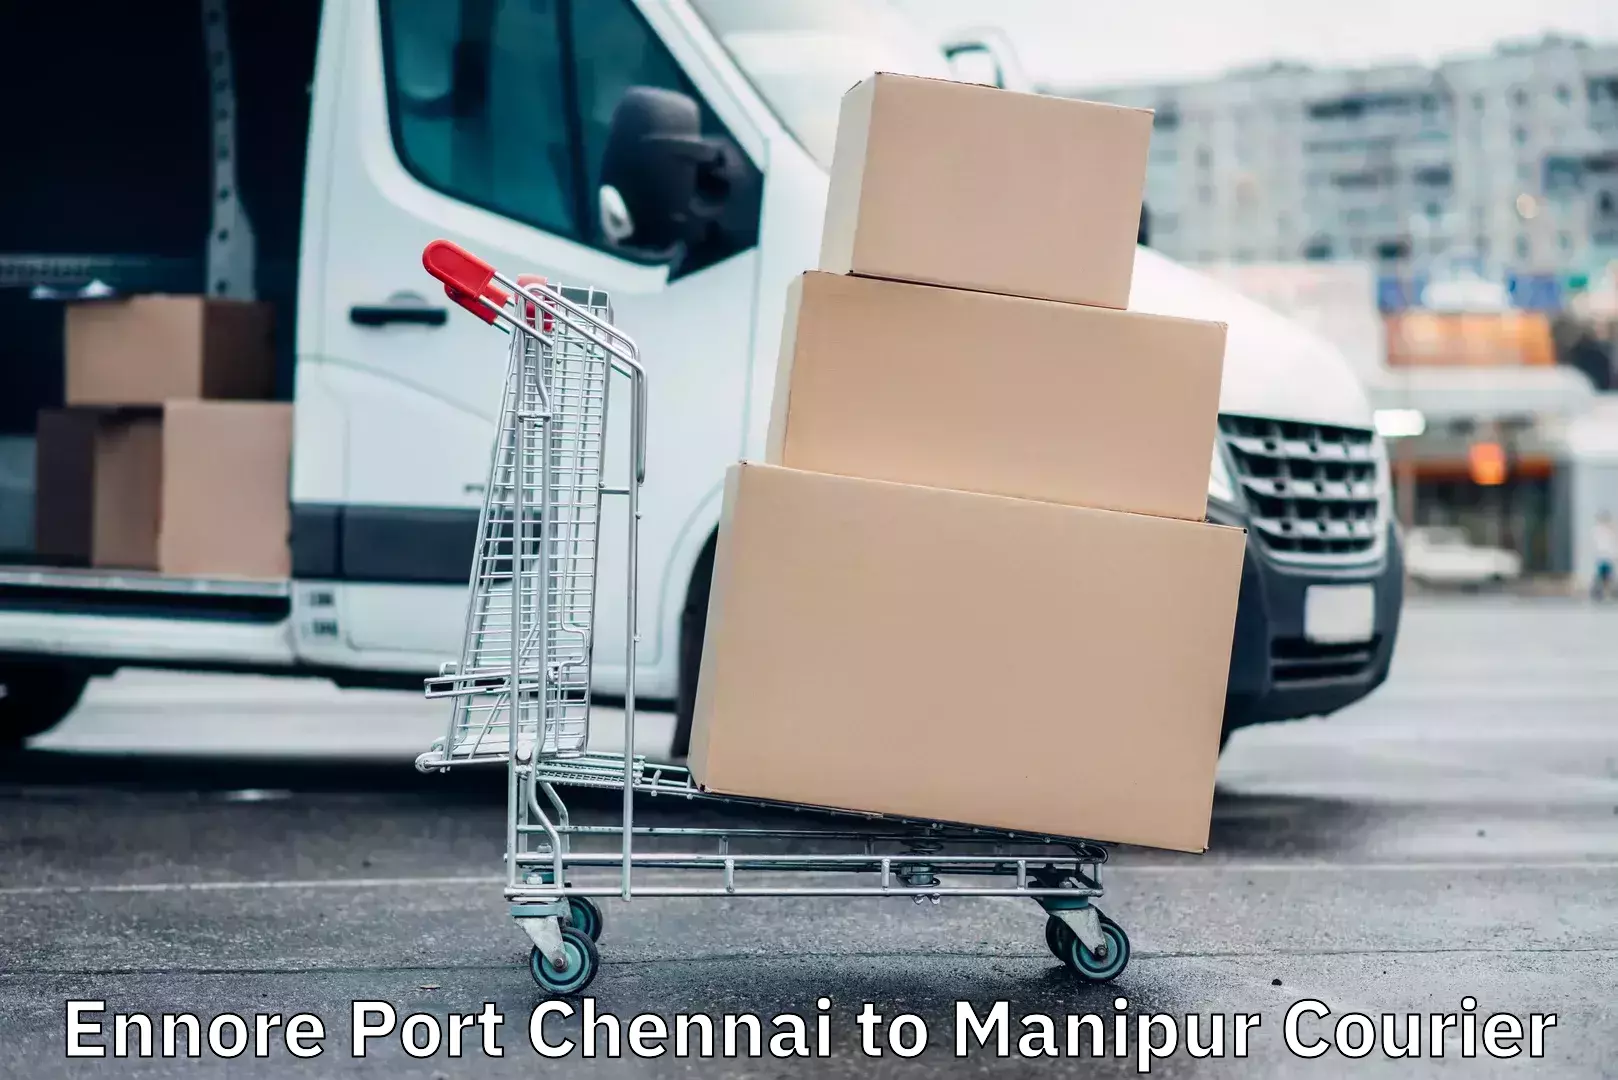 Lightweight parcel options Ennore Port Chennai to Kanti